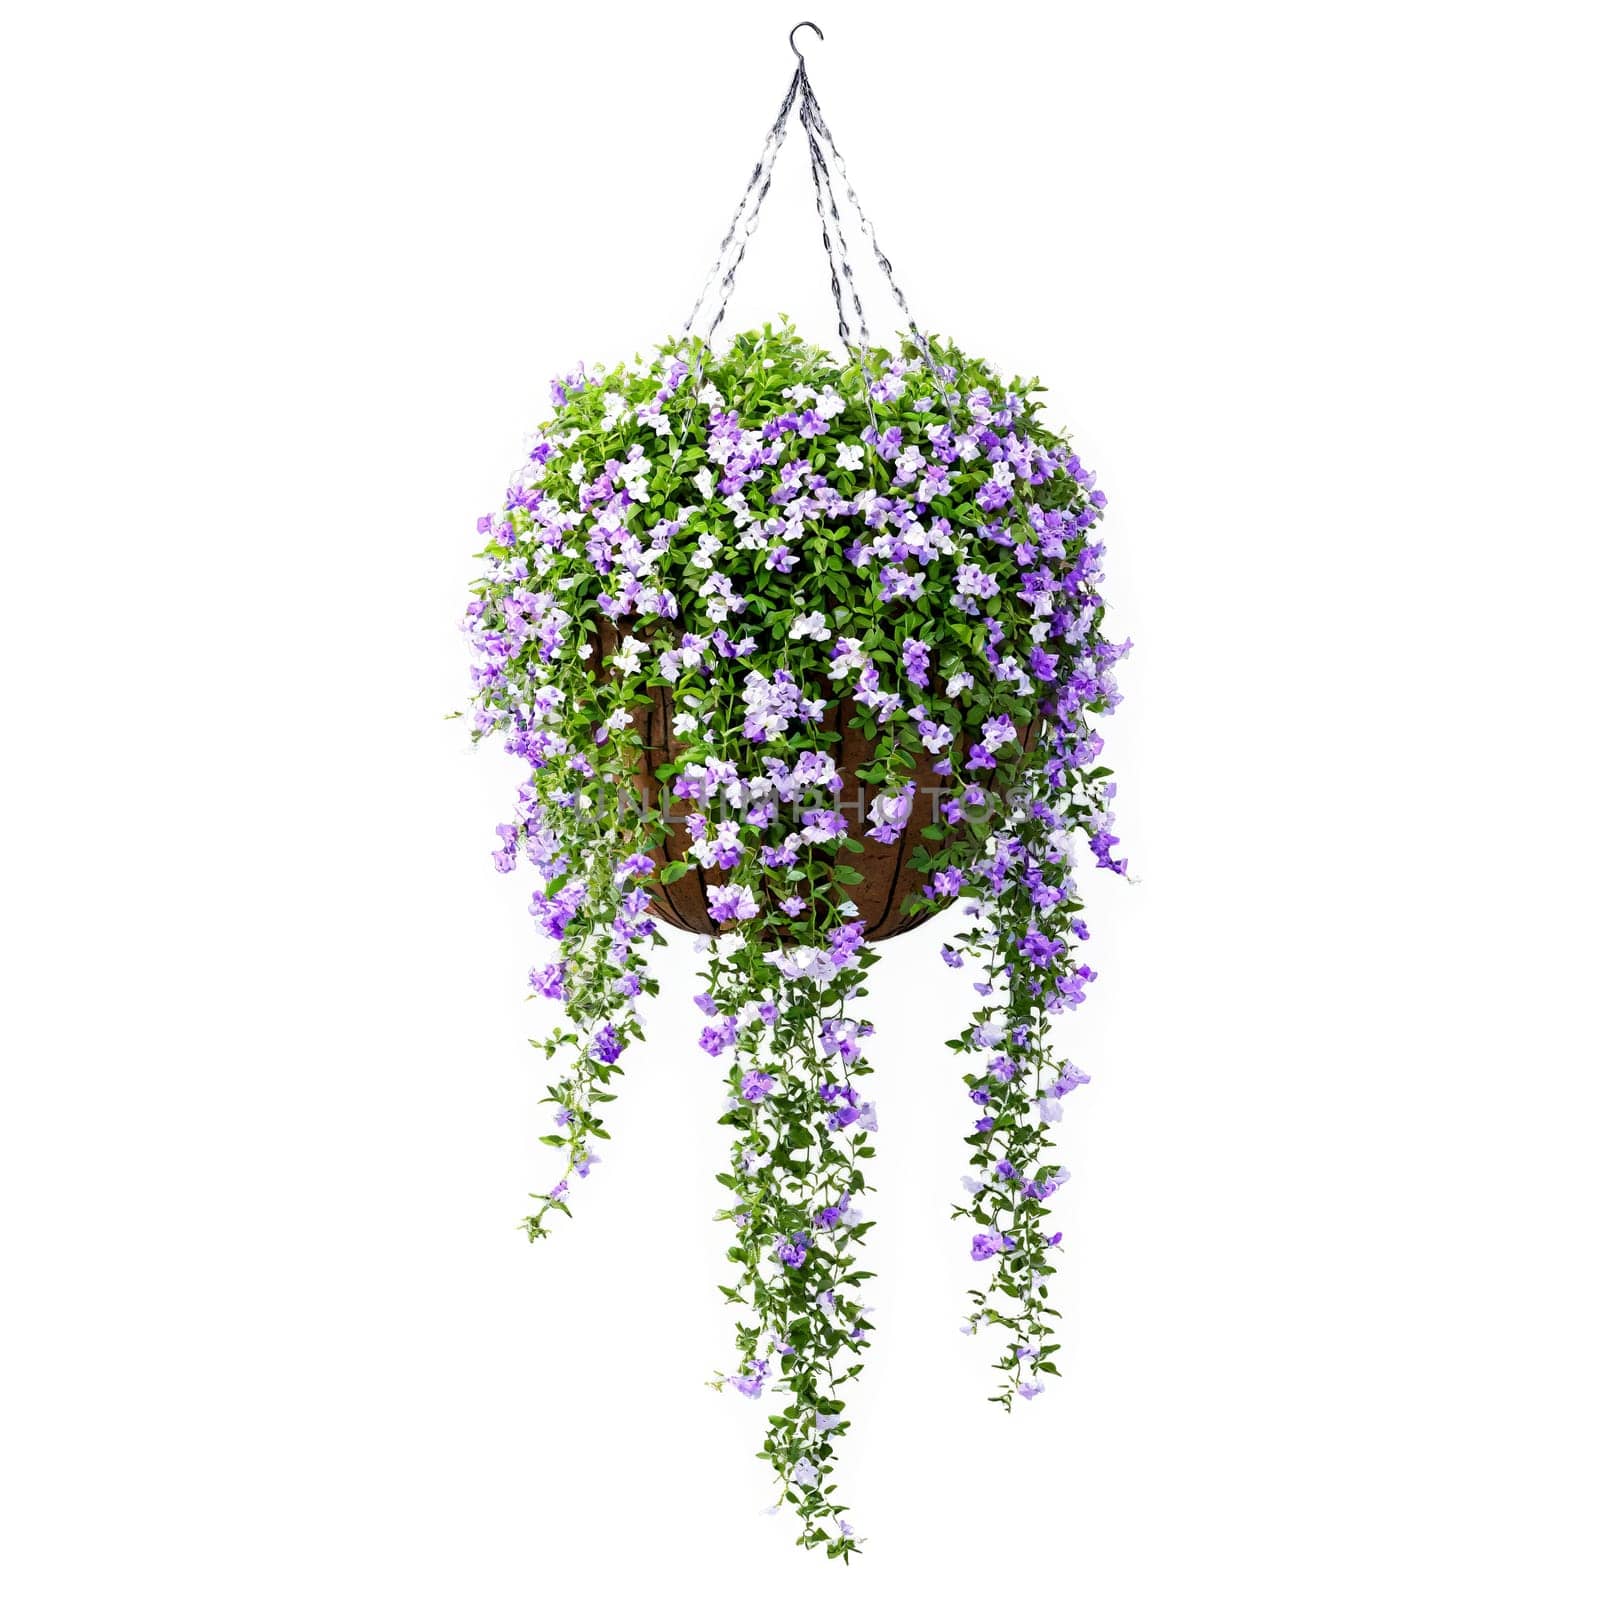 Duranta cascading purple and white flowers on trailing stems in a gray stone hanging basket. Plants isolated on transparent background.